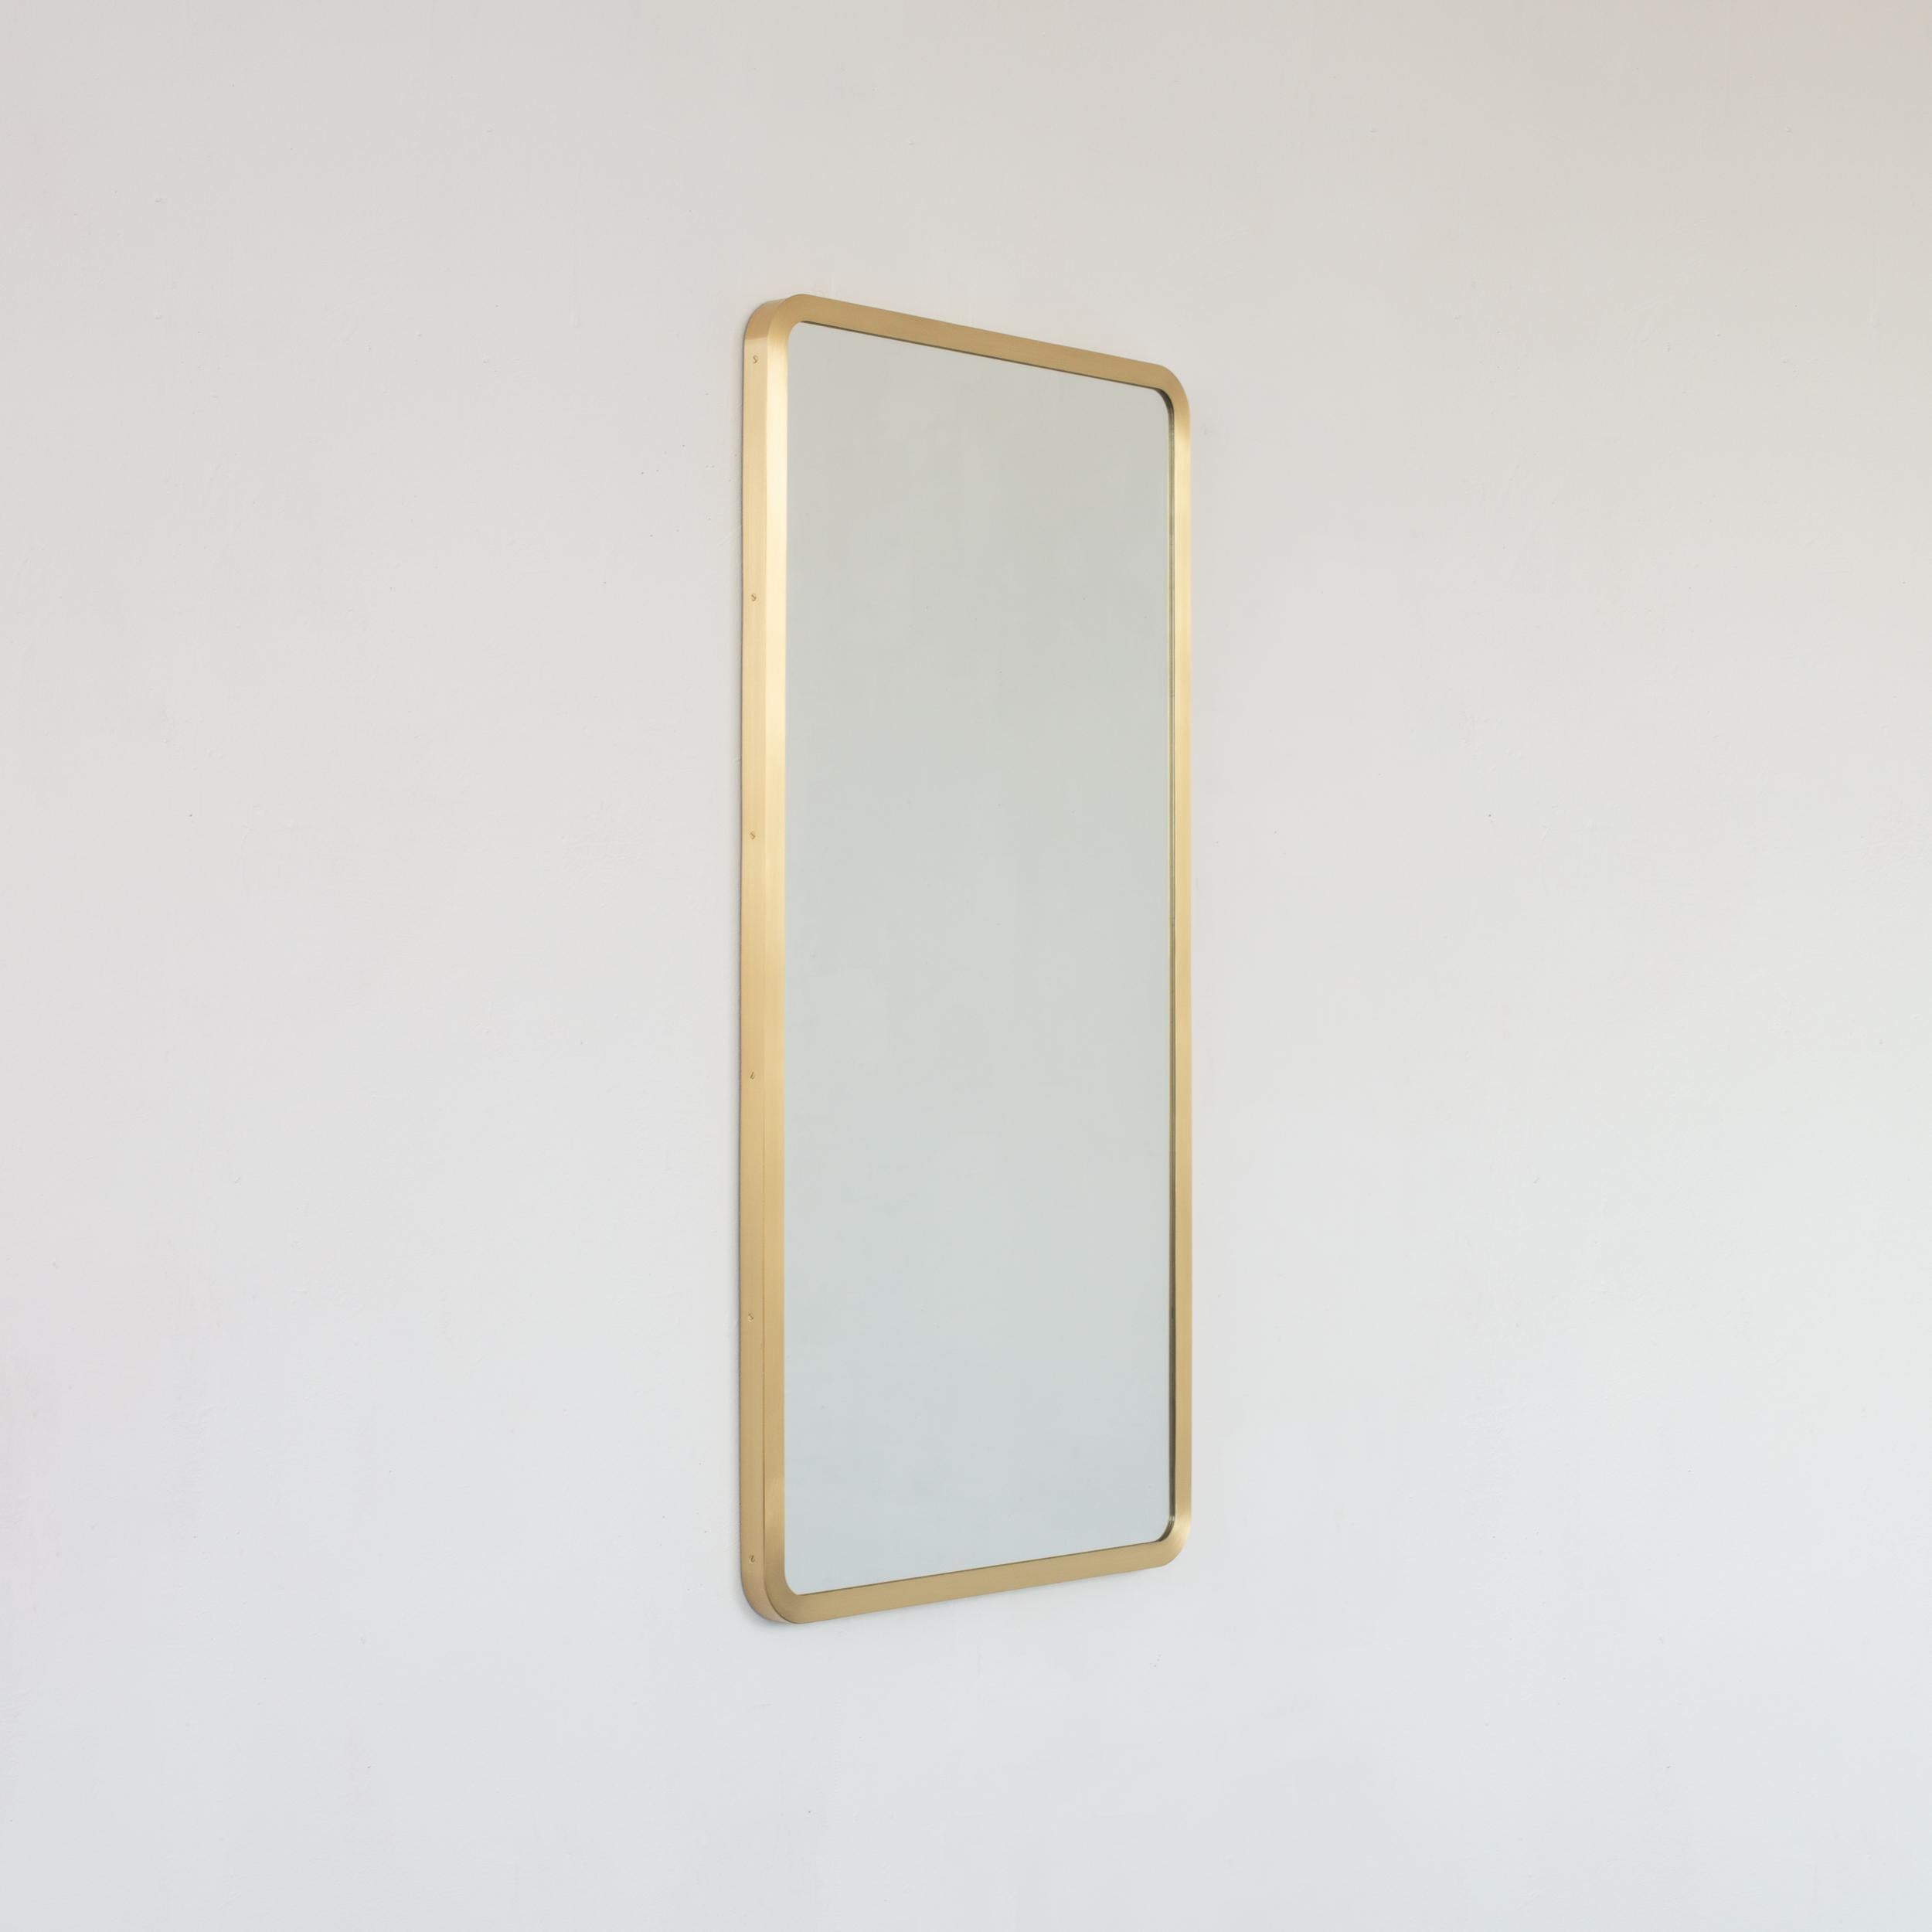 Modern rectangular mirror with an elegant solid brushed brass frame.  Part of the charming Quadris™ collection, designed and handcrafted in London, UK. 

Our brand new 'Full Frame' design maintains the chic and elegant style of Alguacil & Perkoff'